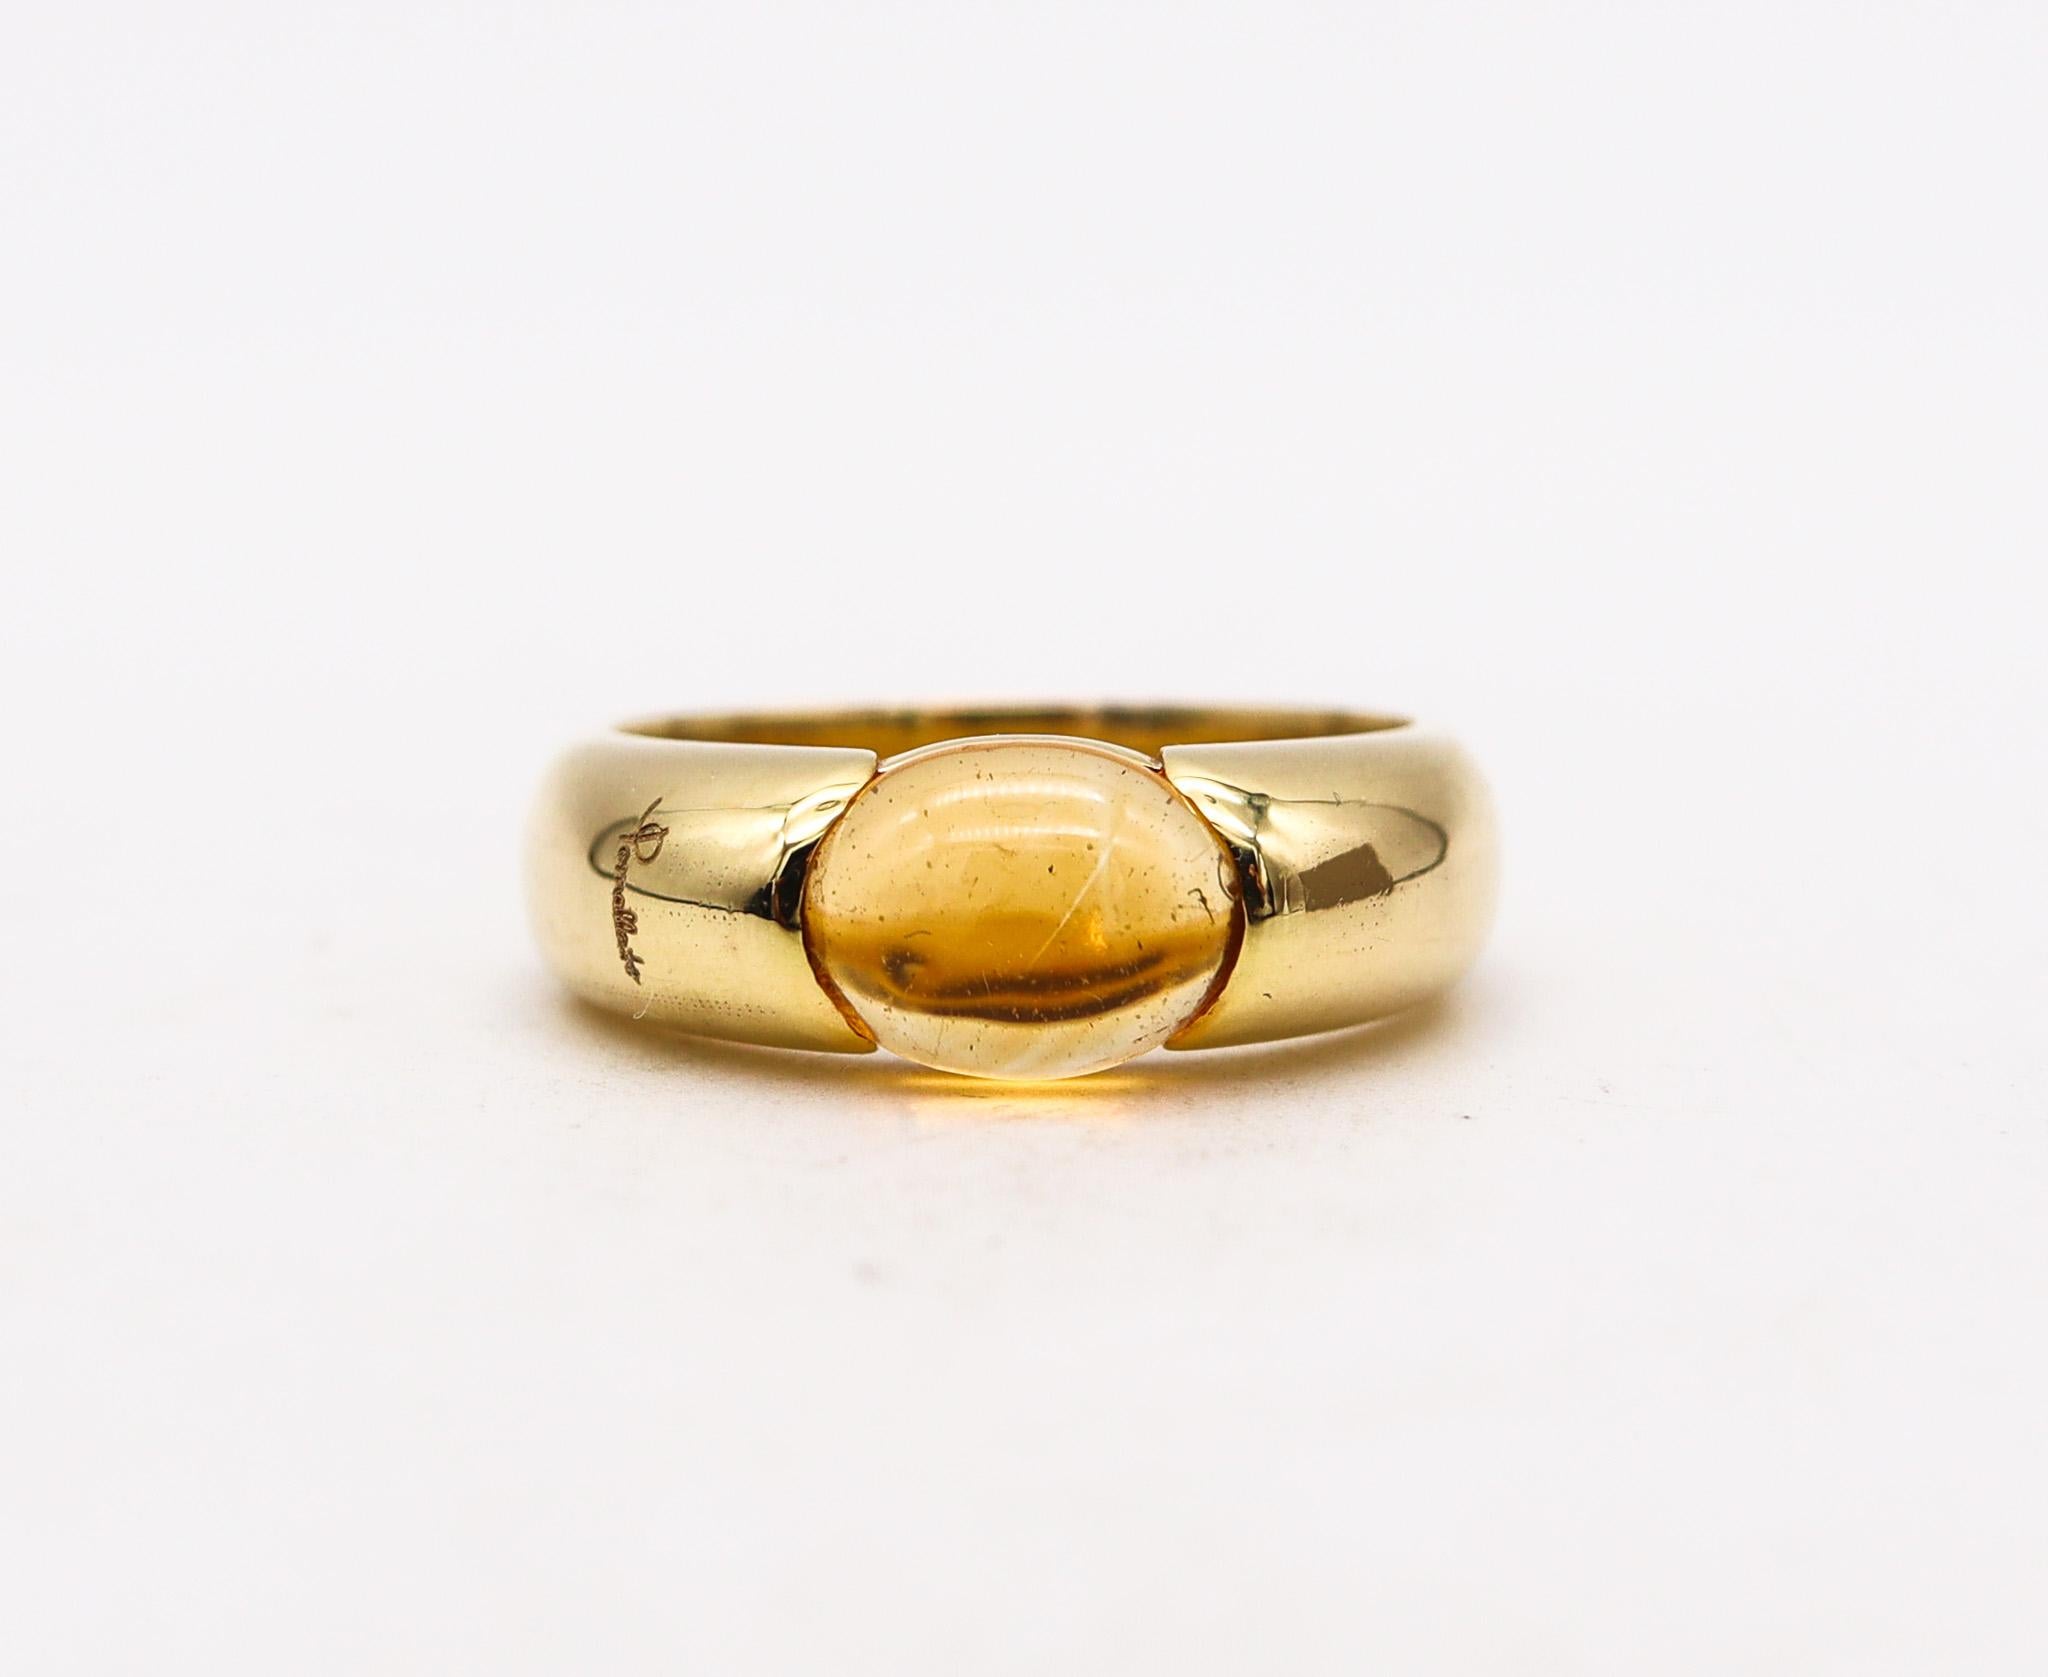 A candy ring designed by Pomellato

A beautiful candy ring, created in Milano Italy by the prestigious jewelry house of Pomellato. This candy ring has been carefully crafted in solid yellow gold of 18 karats with high polished finish and mount in an